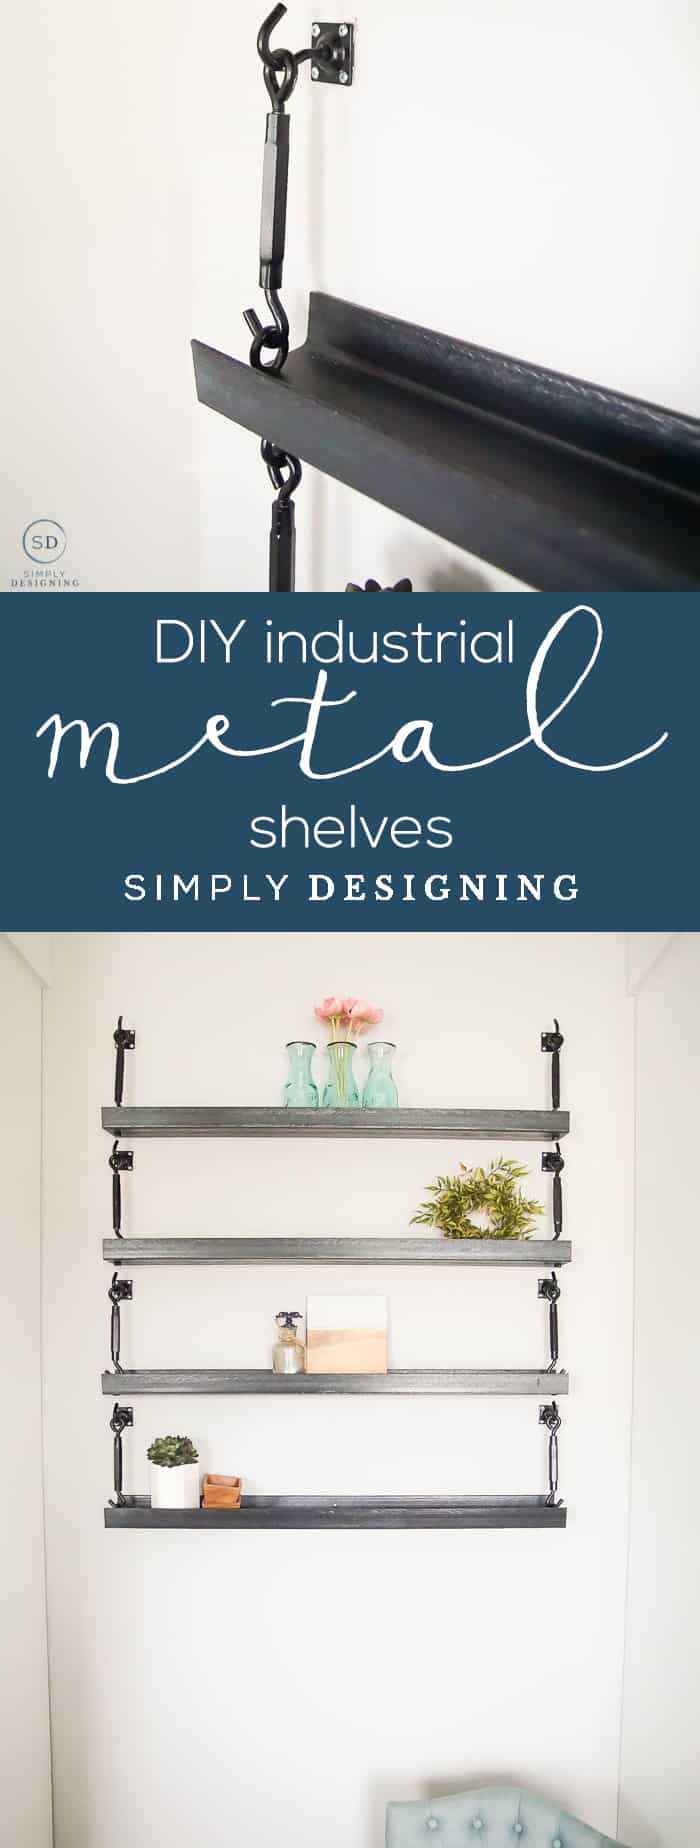 How To Make Industrial Metal Shelves, How To Make Metal And Wood Shelves